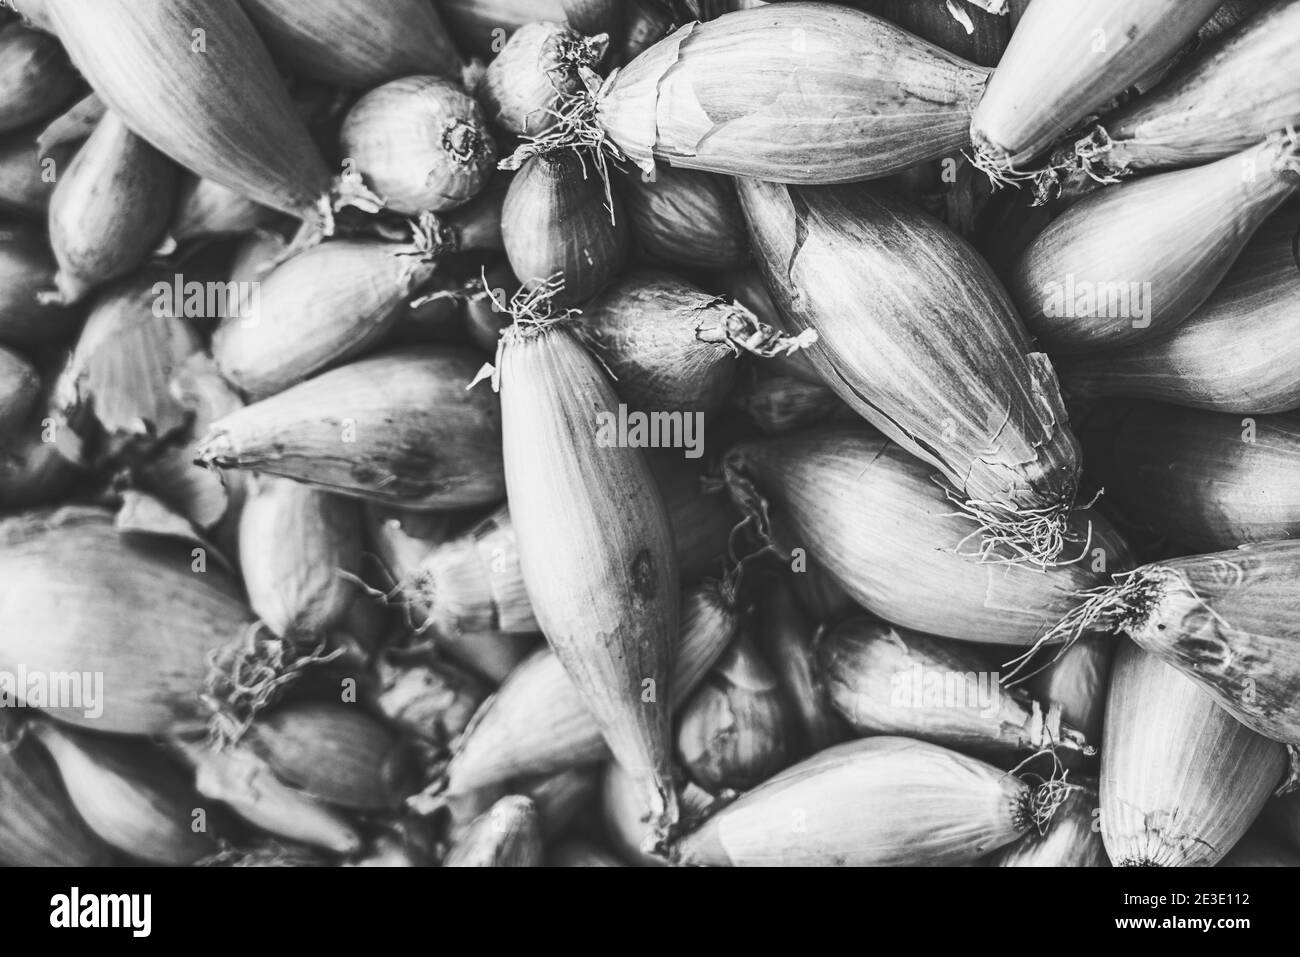 vintage black and white shot of a pile of onions Stock Photo